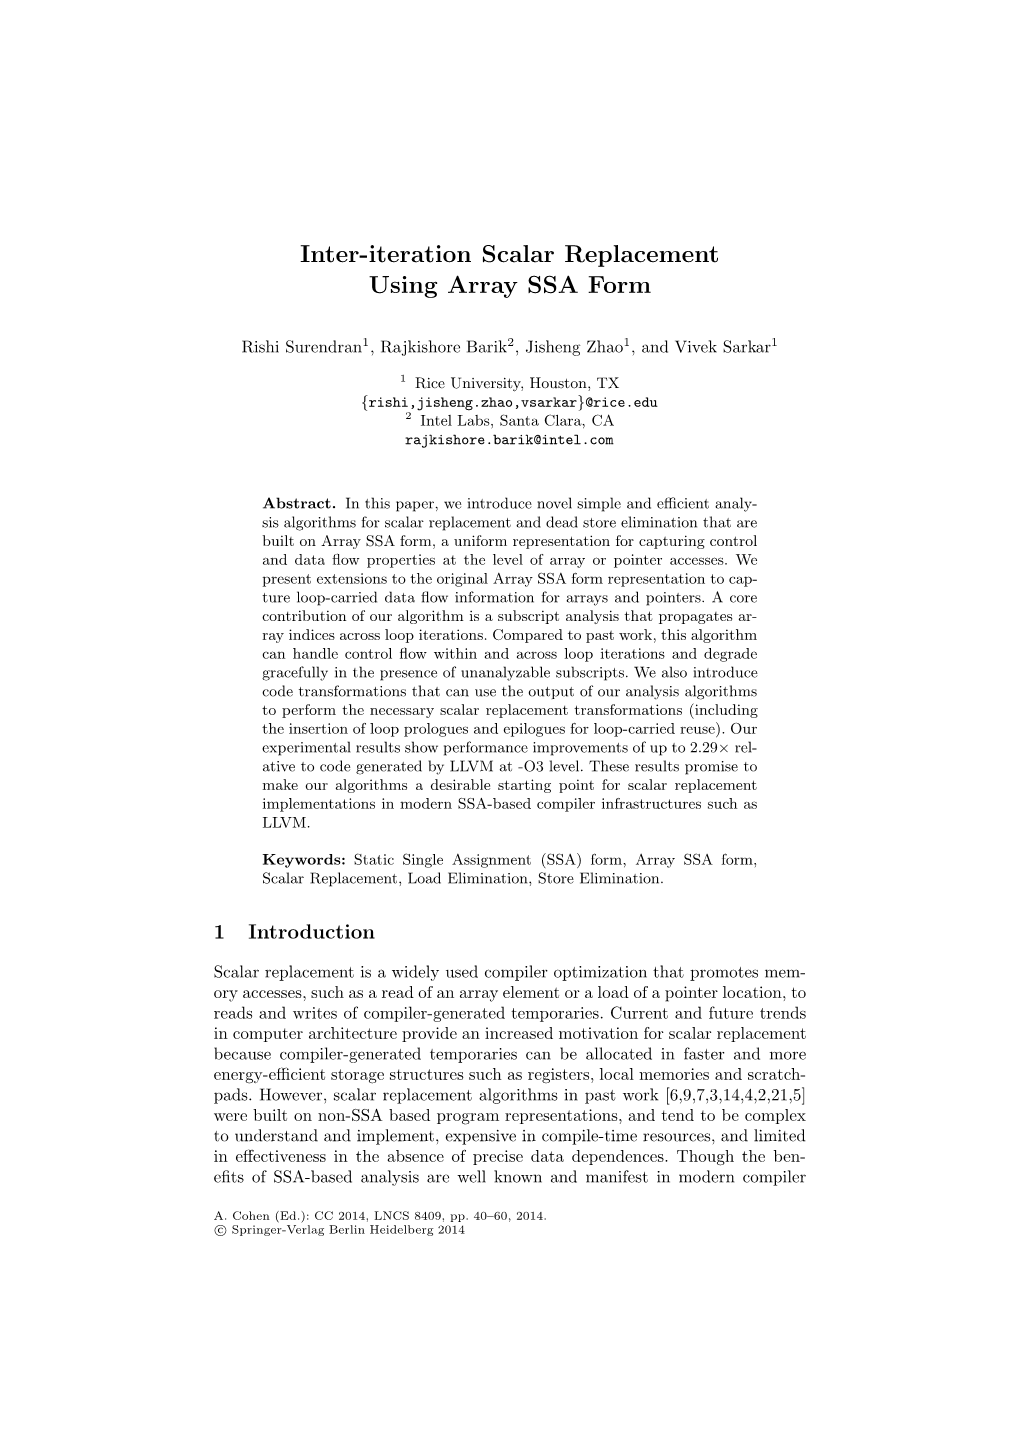 Inter-Iteration Scalar Replacement Using Array SSA Form